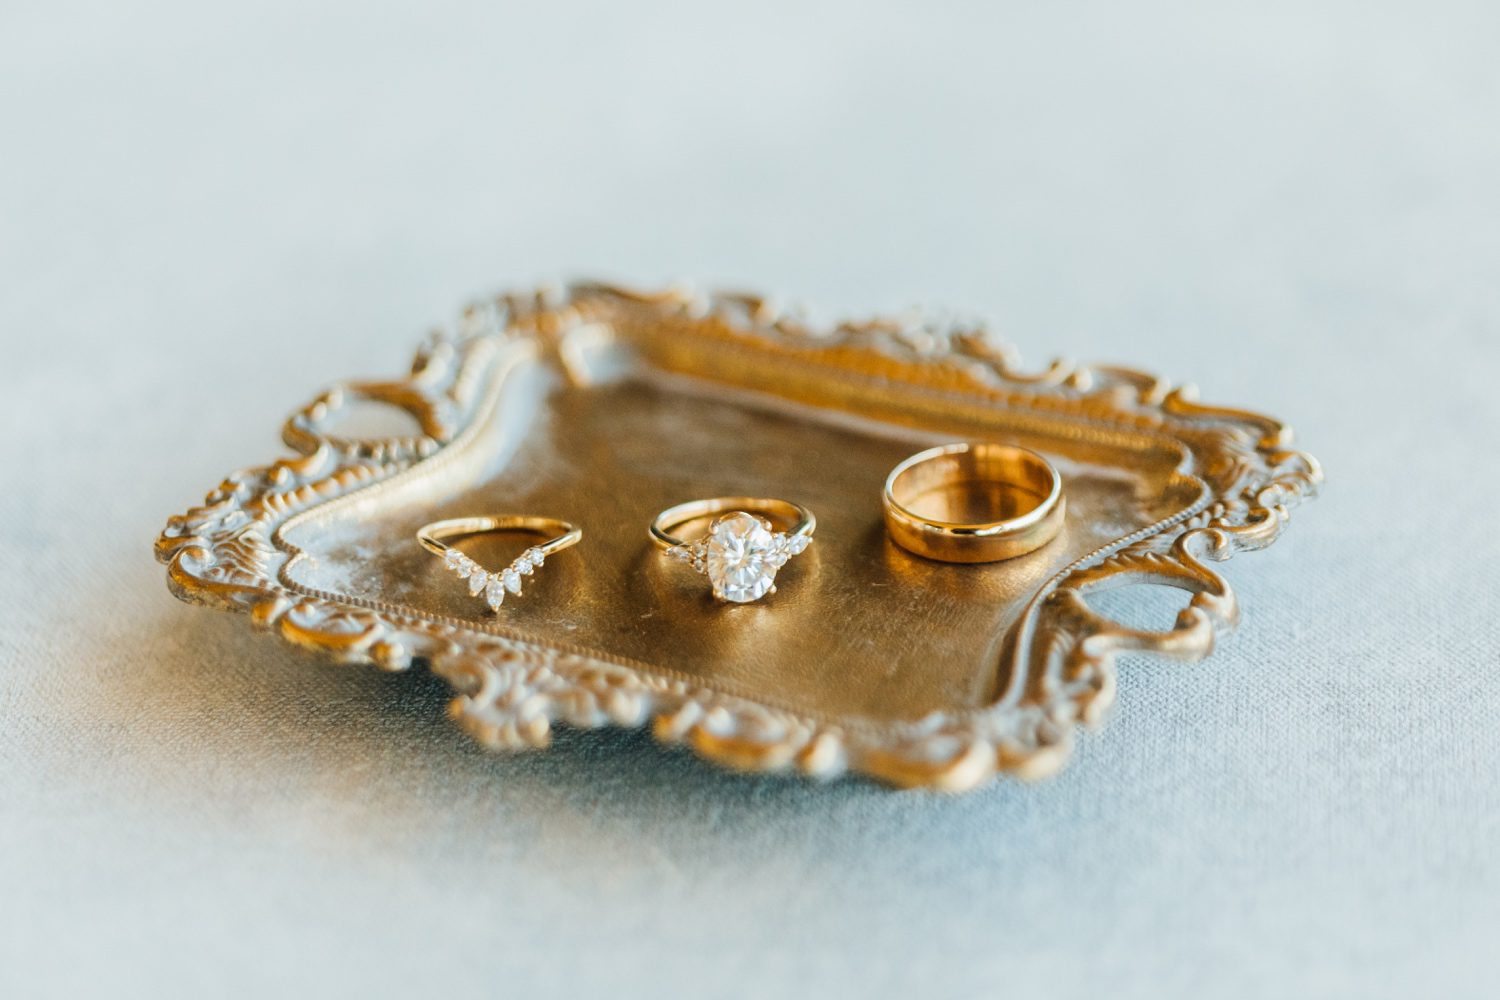 Gold Wedding Jewelry for european chateau inspired wedding by wine country photographer Jessica Sofranko